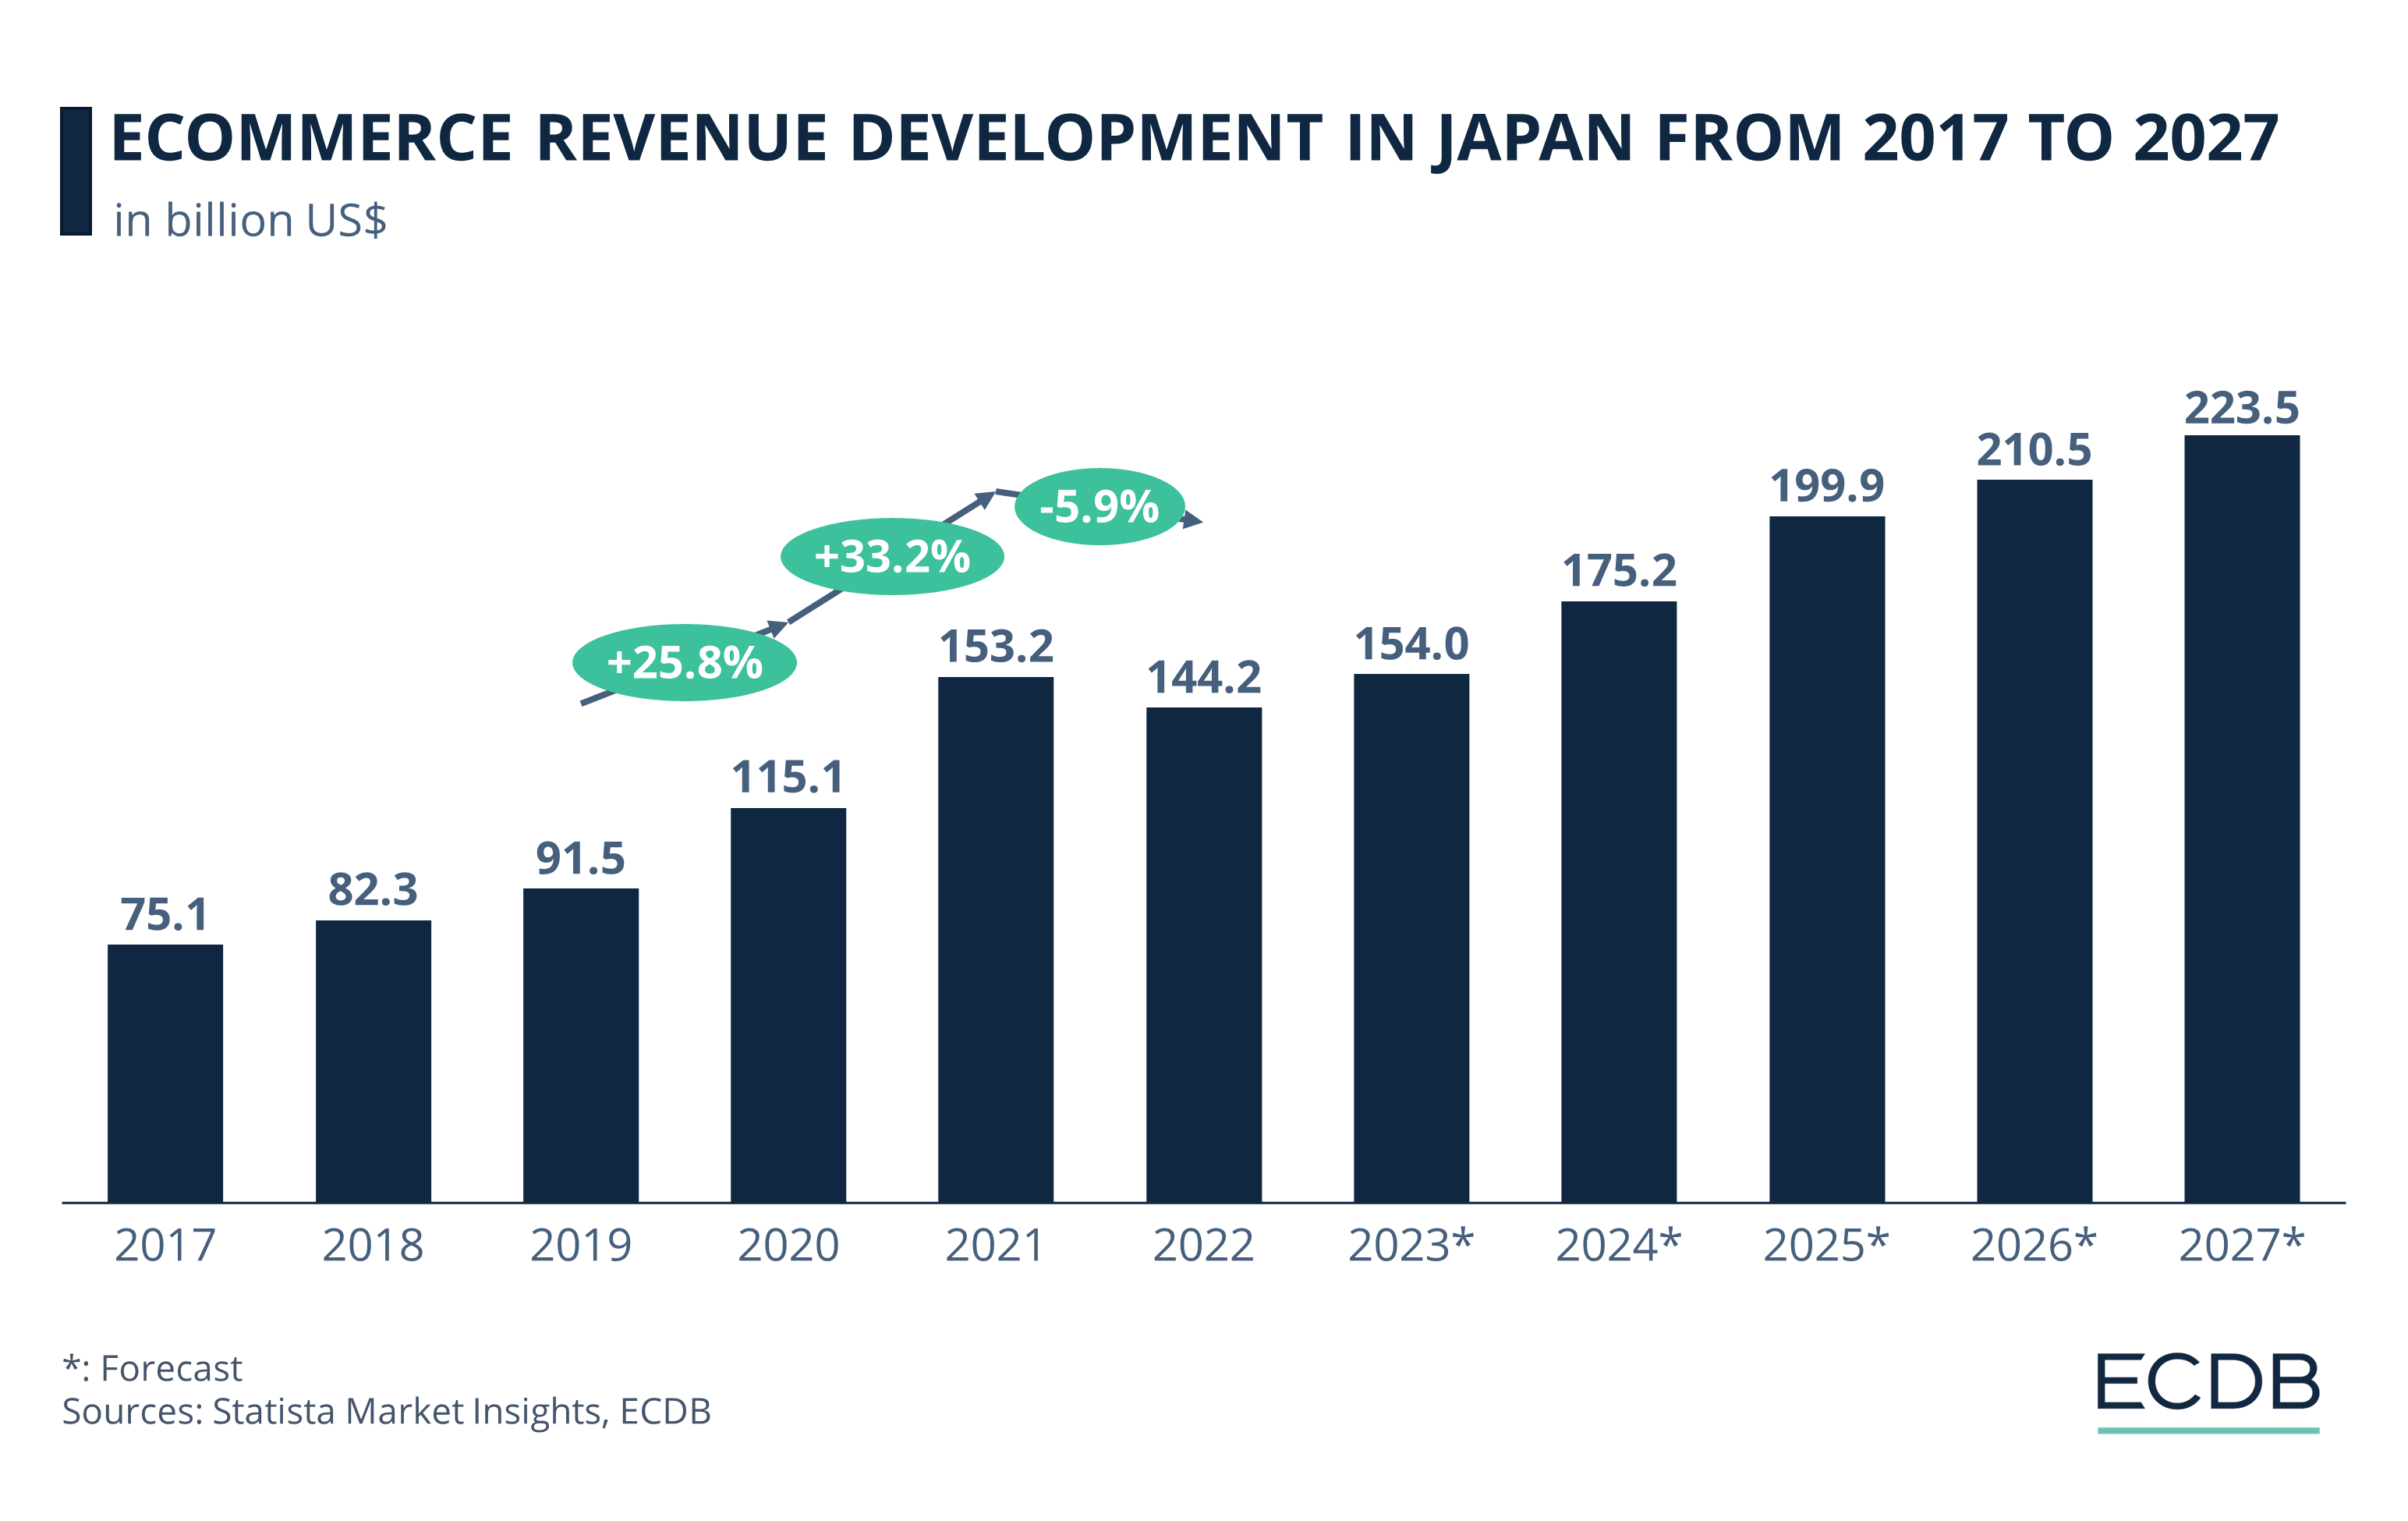 eCommerce Revenue Development in Japan from 2017 to 2027